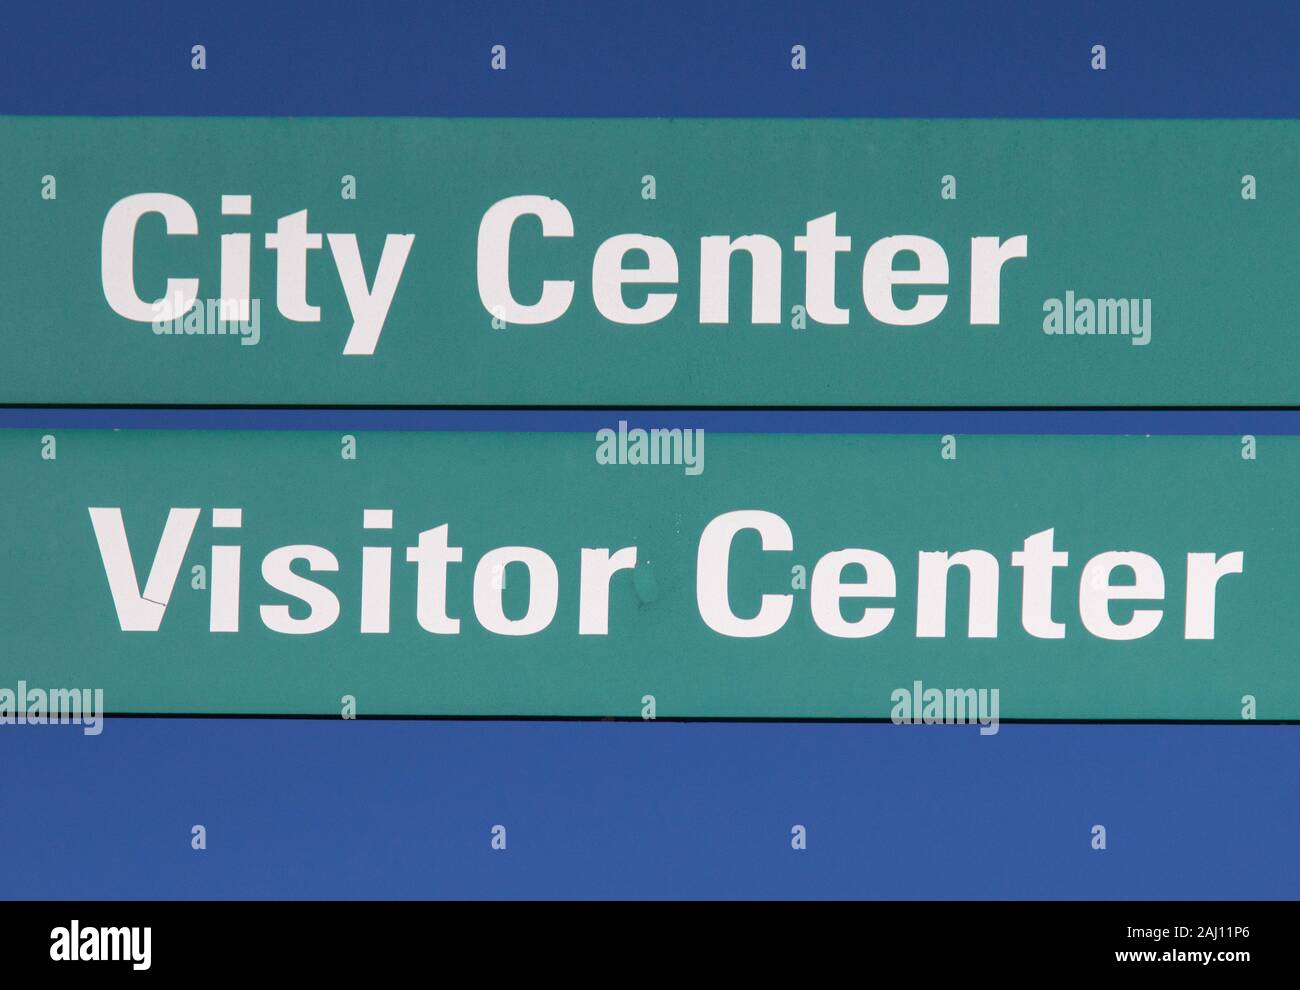 City Center And Visitor Center sign in horizontal orientation. Stock Photo